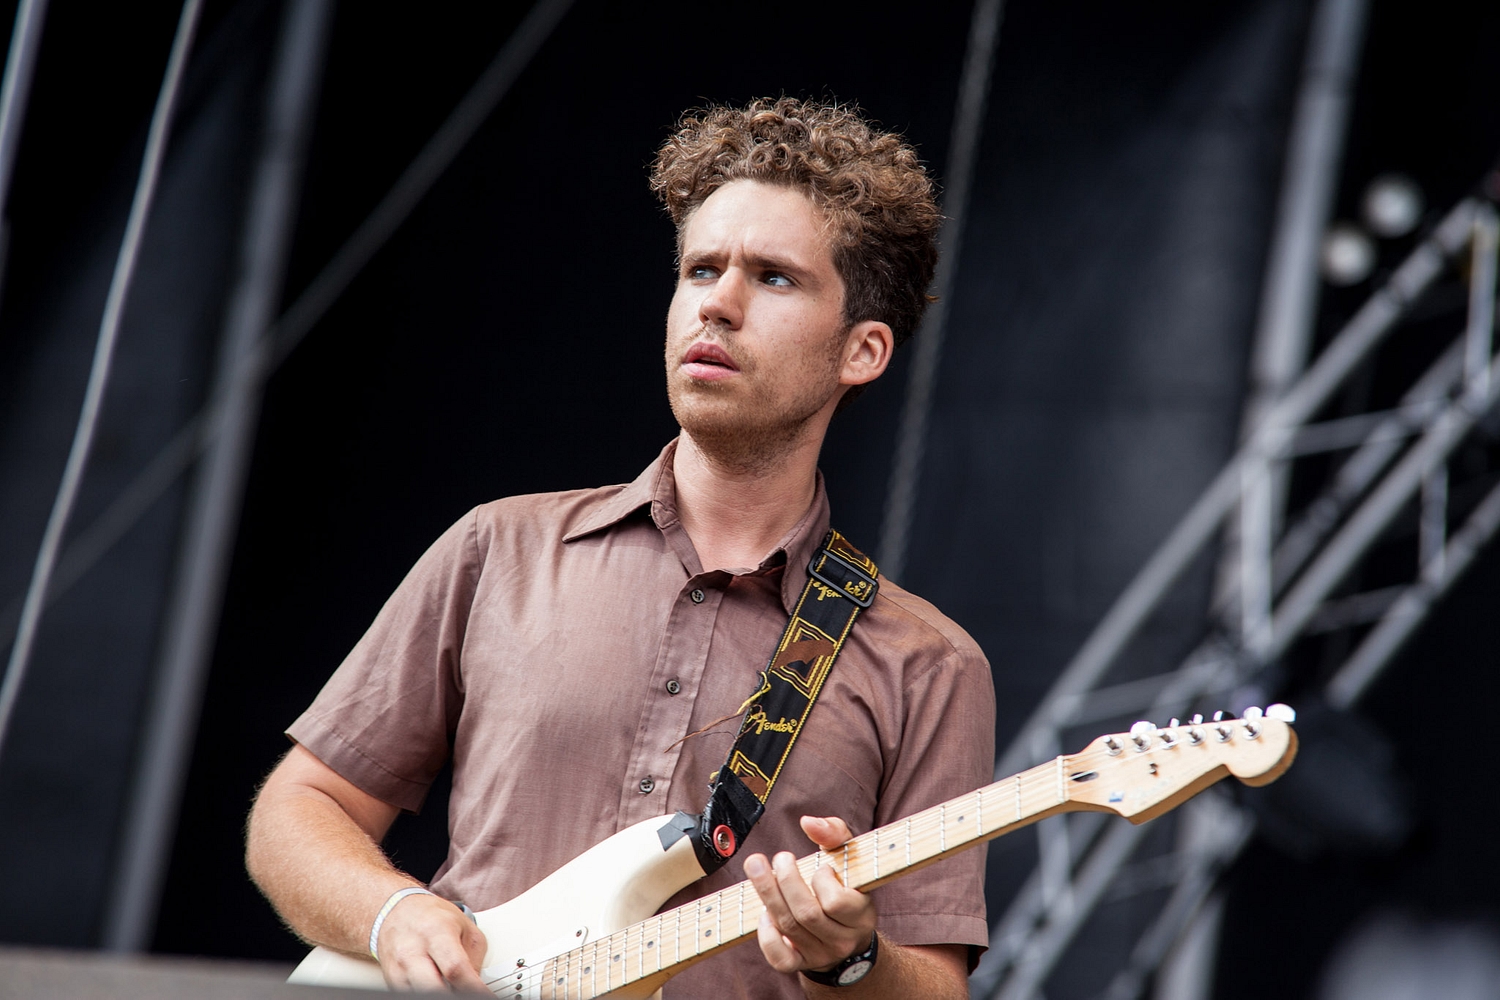 Parquet Courts’ Andrew Savage is releasing a solo album